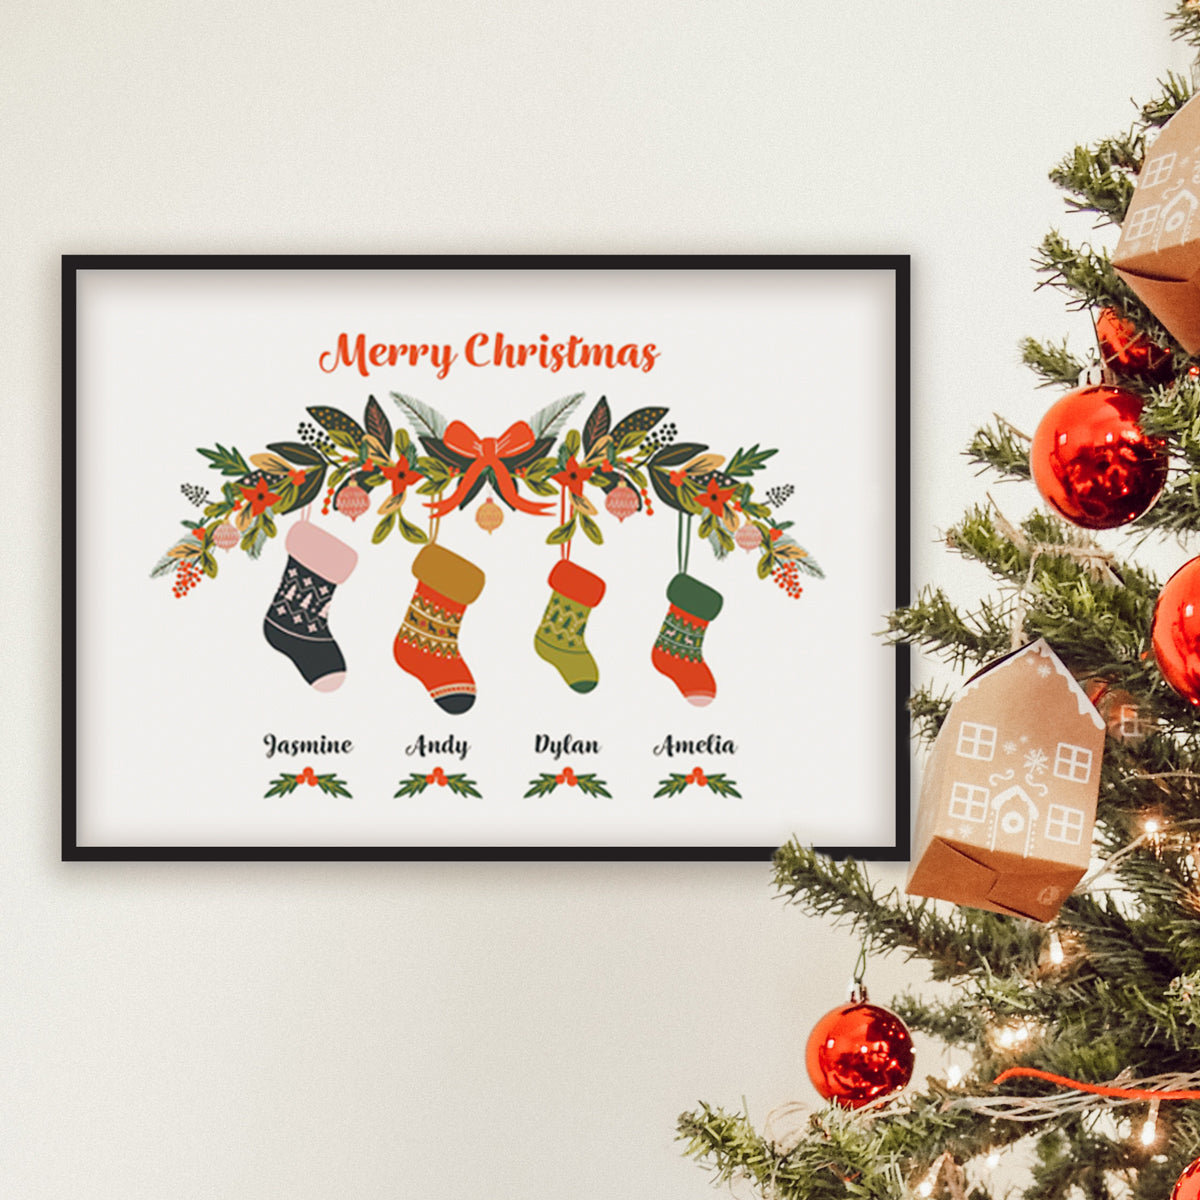 Black Framed option - Customisable personalised name Christmas Print by Studio Peers.  Merry Christmas decoration with Stockings and personalised family names.